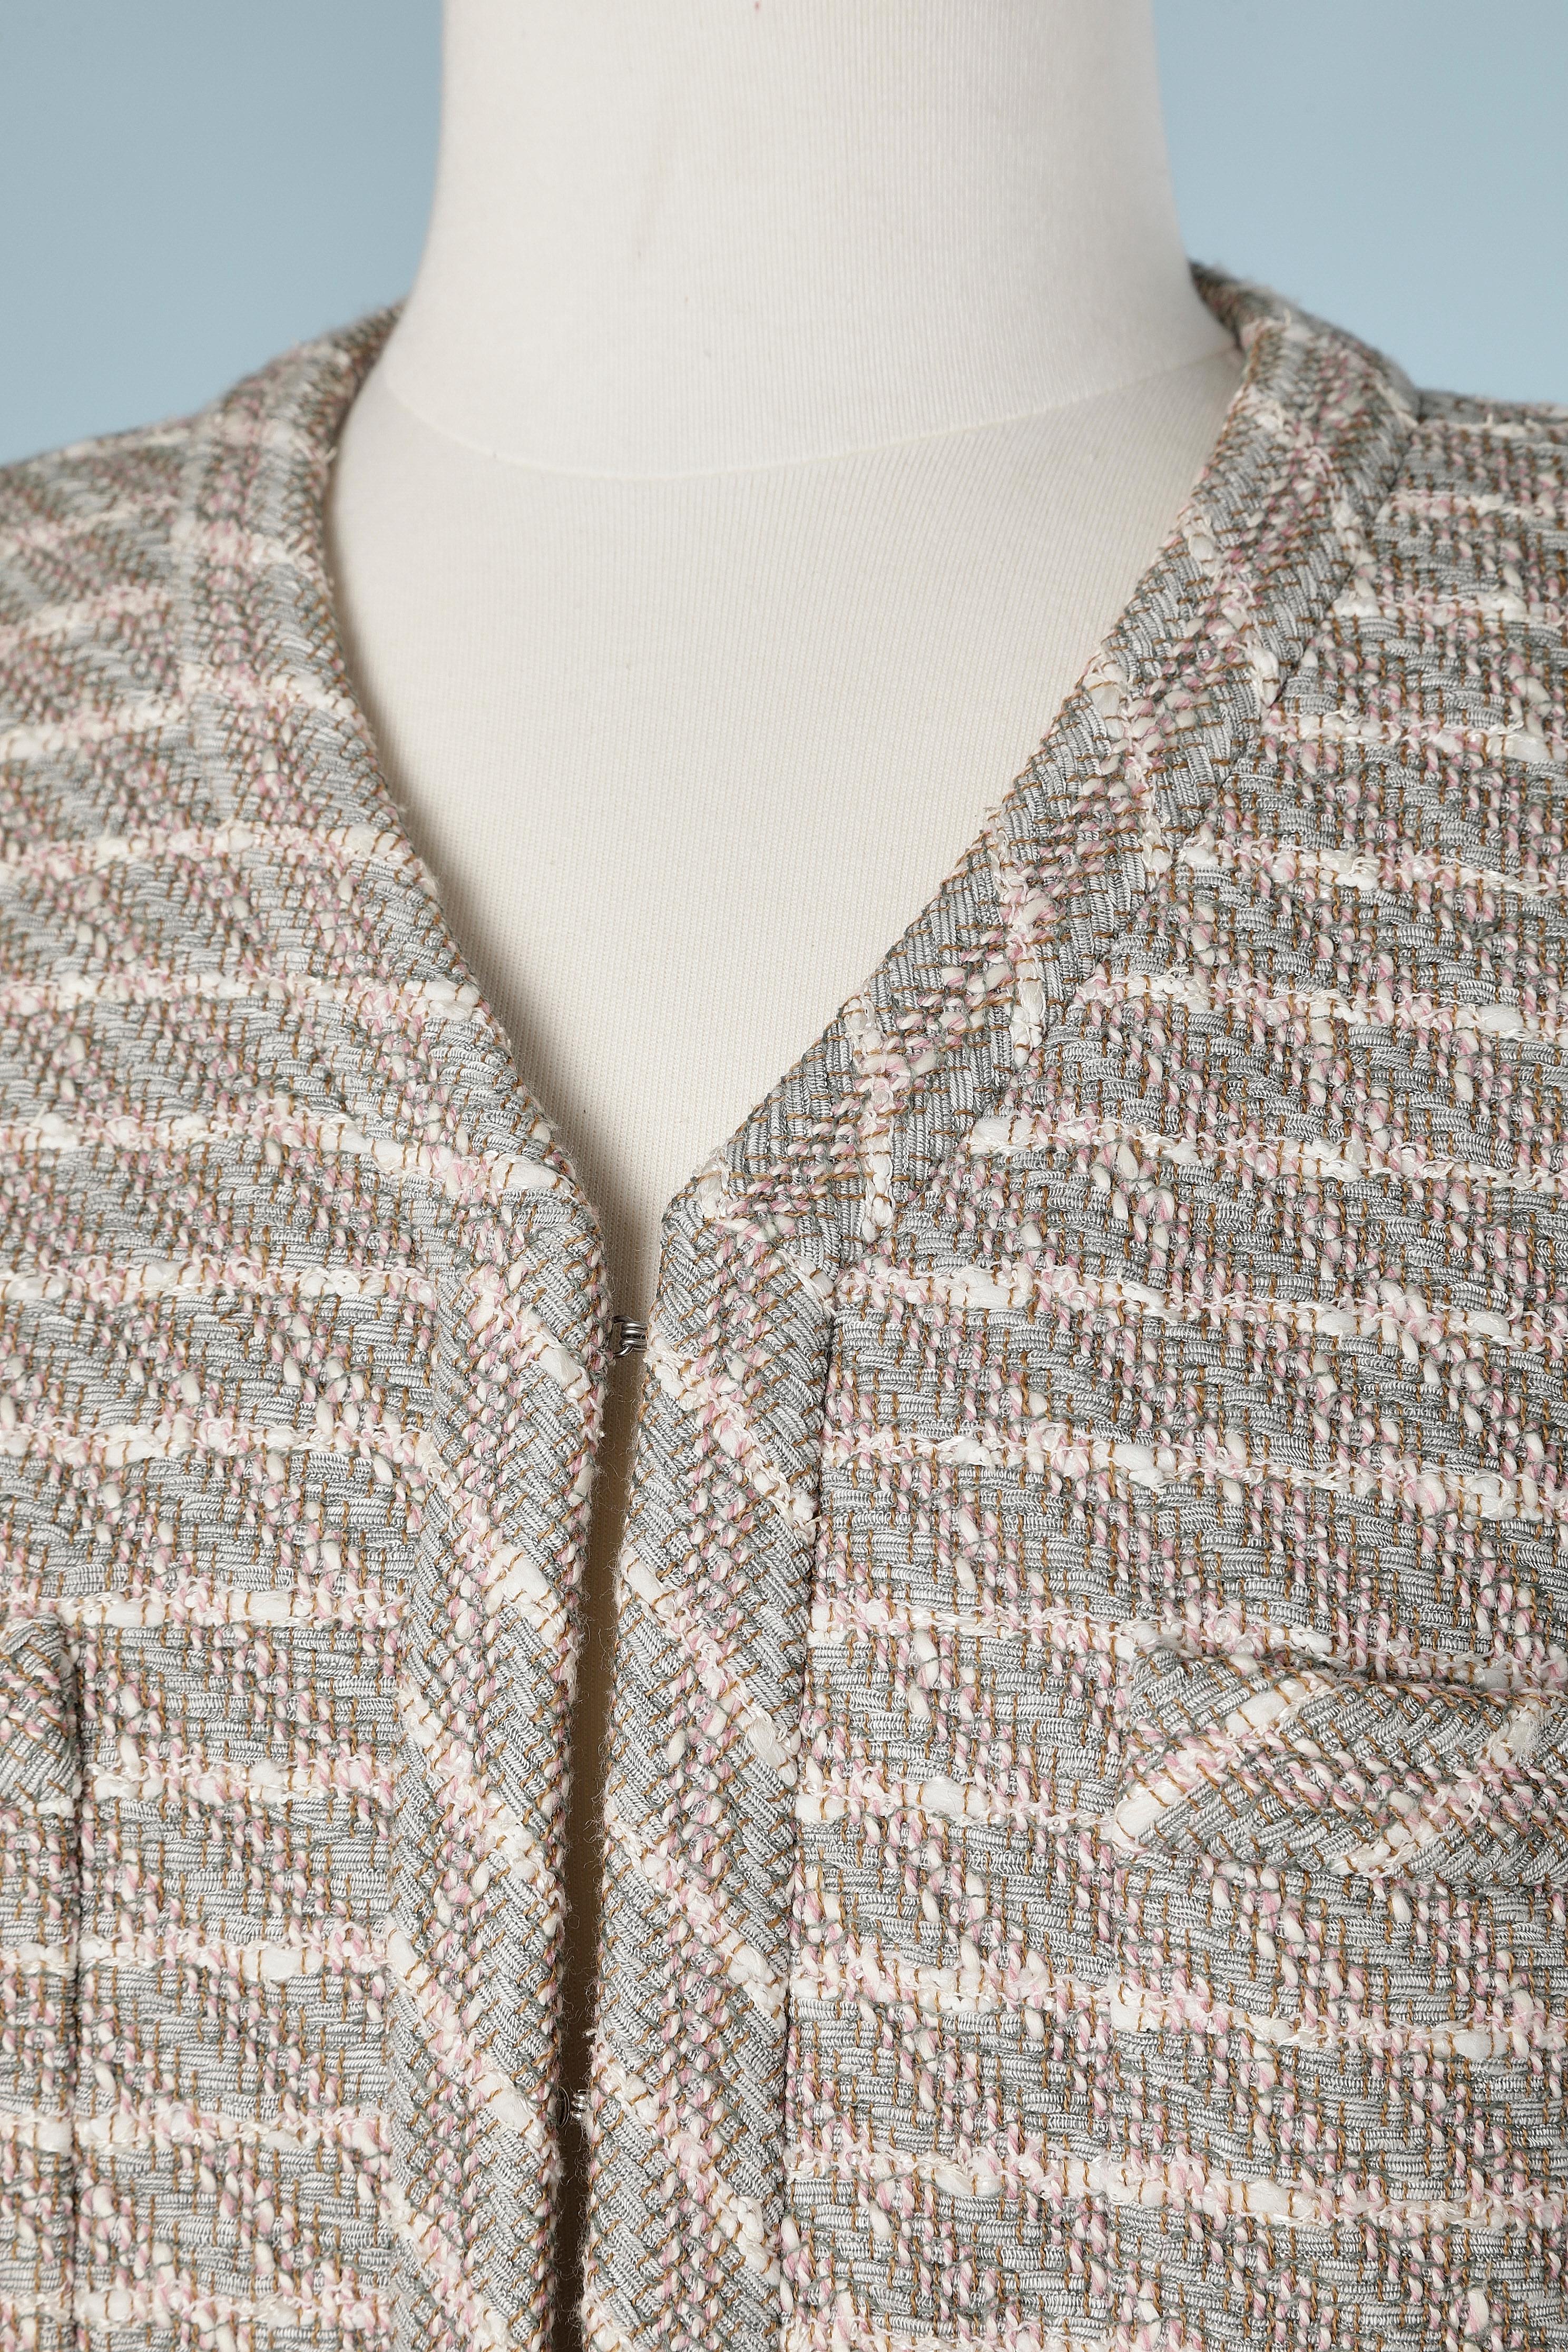 Pink and grey tweed edge to edge jacket with striped silk lining.
Metallic chain in the inside edge of the jacket. Small shoulder pad. 
Hook&eye to close the jacket in the middle front. Branded mother of pearl buttons and buttonhole at the end of